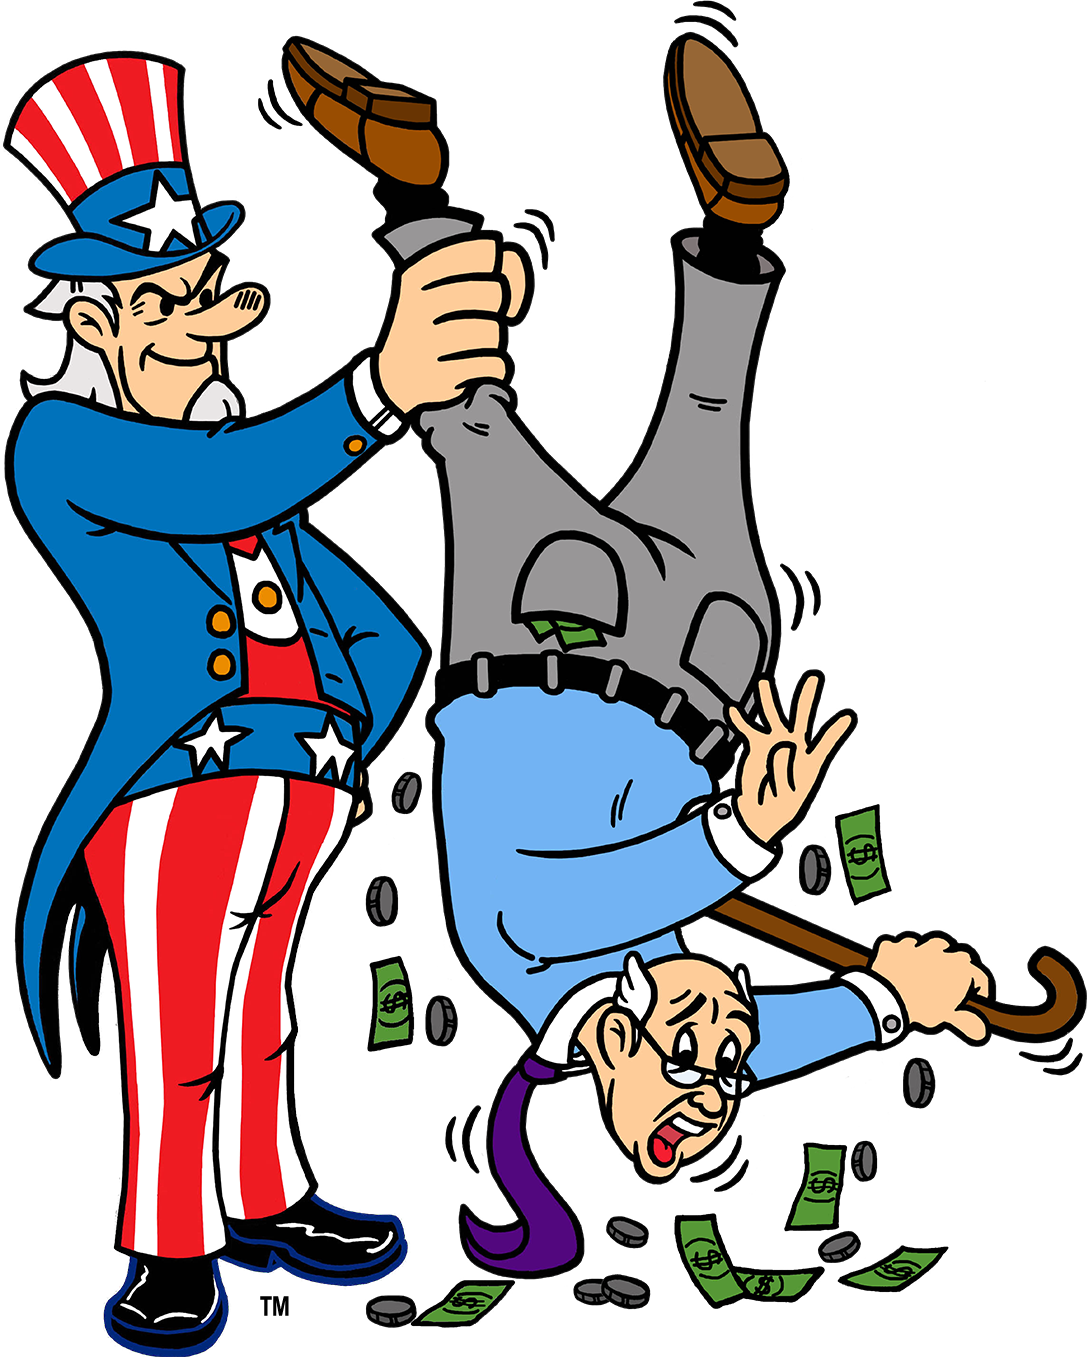 I Want To Close Whole Life Insurance Cases Quicker - Uncle Sam Tax Clipart (1087x1357)